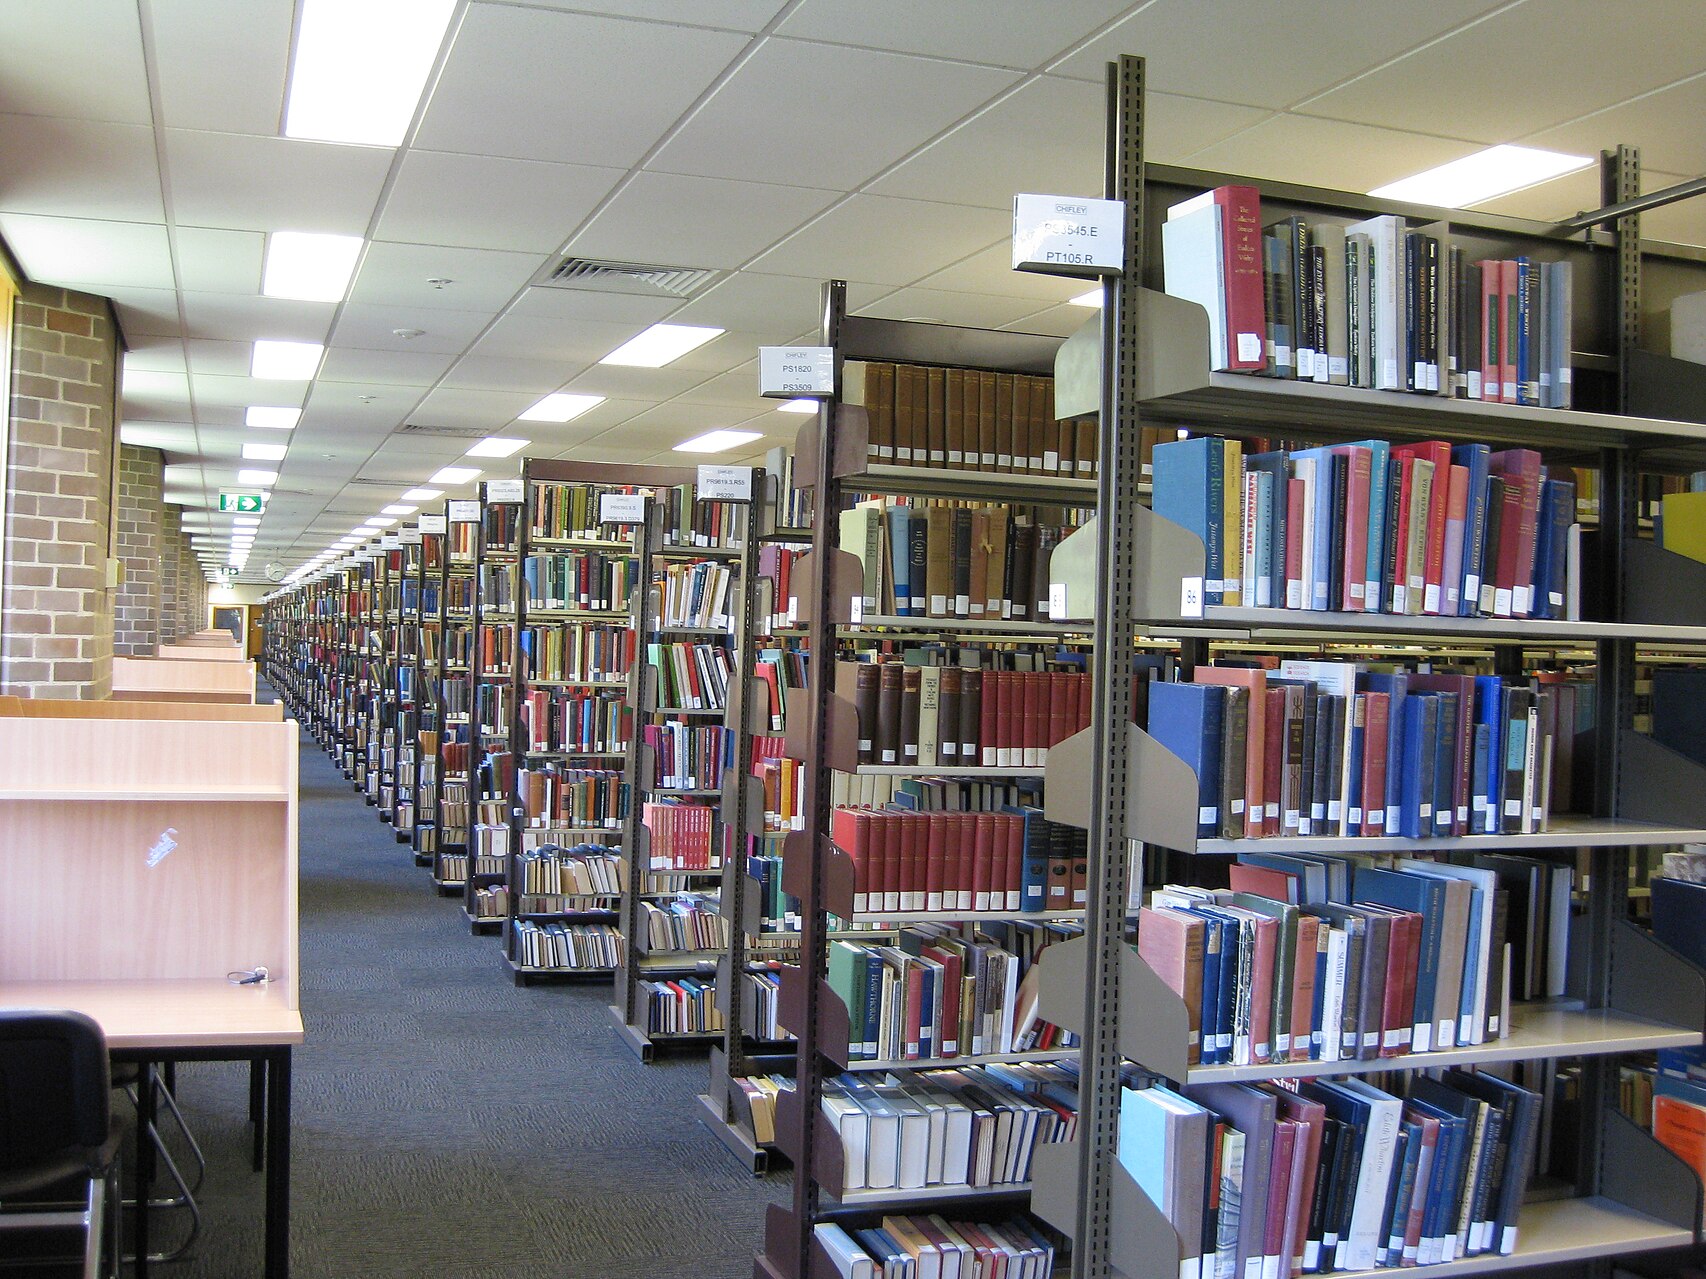 A corridor through the library, with row after row of metal bookshelves on the right, and desks for private study on the left